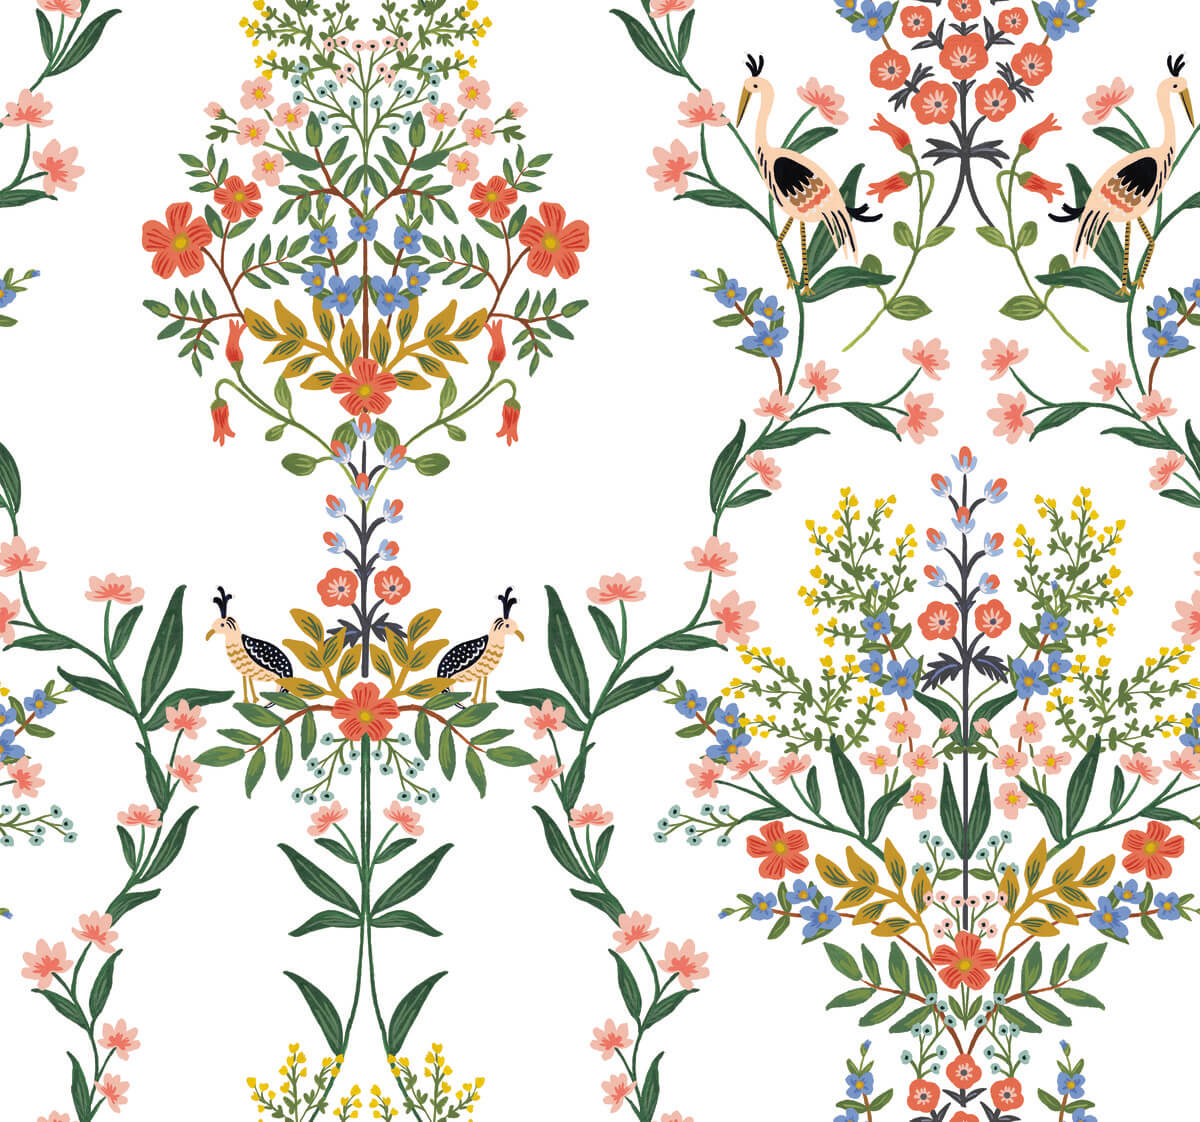 Rifle Paper Co. Luxembourg Peel & Stick Wallpaper - SAMPLE